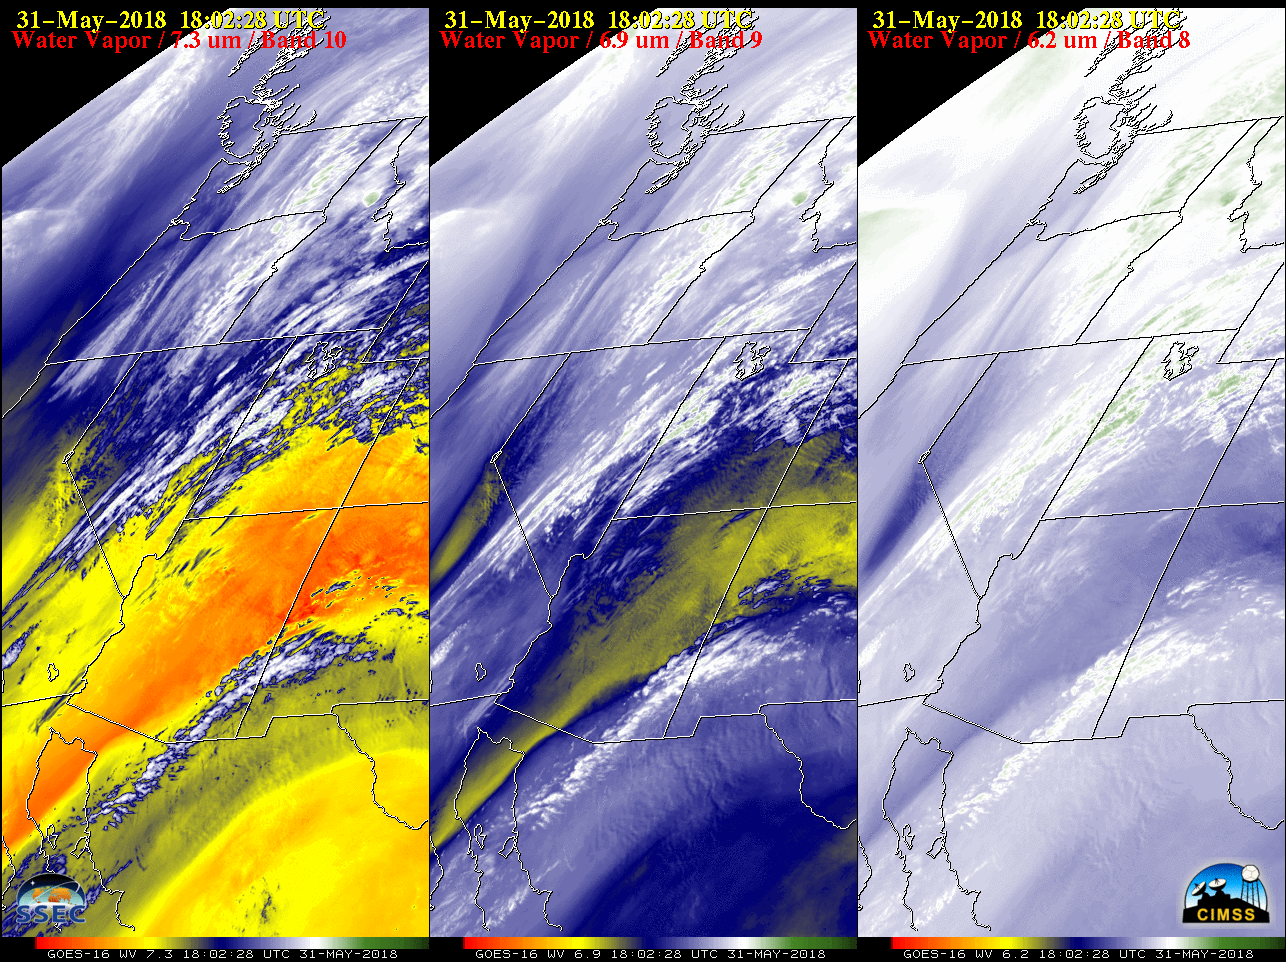 GOES-16 Lower-level (7.3 µm, left), Mid-level (6.9 µm, center) and Upper-level (6.2 µm, right) Water Vapor images [click to play MP4 animation]